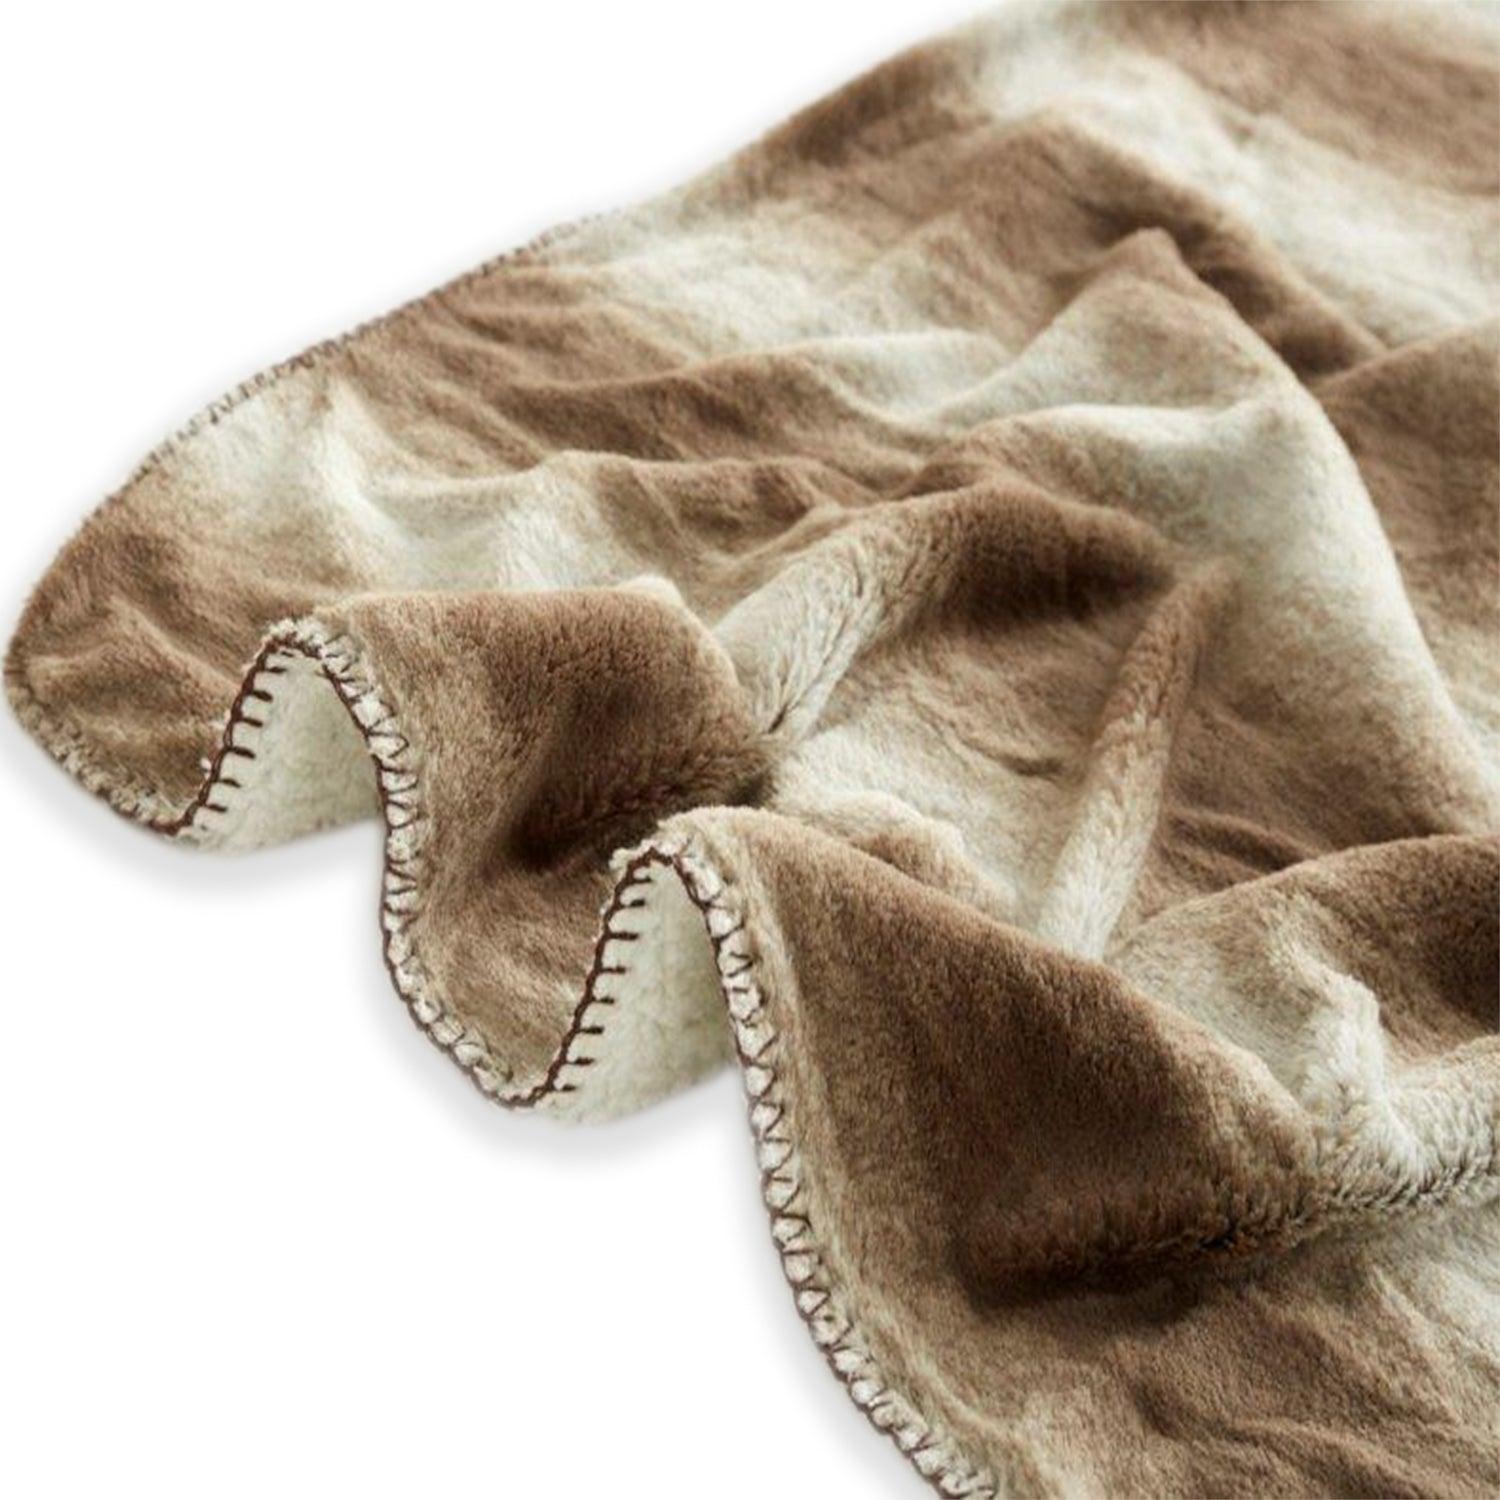 regal comfort | sherpa throw | fading glade ombre in brown & cream - Home Revival Shop